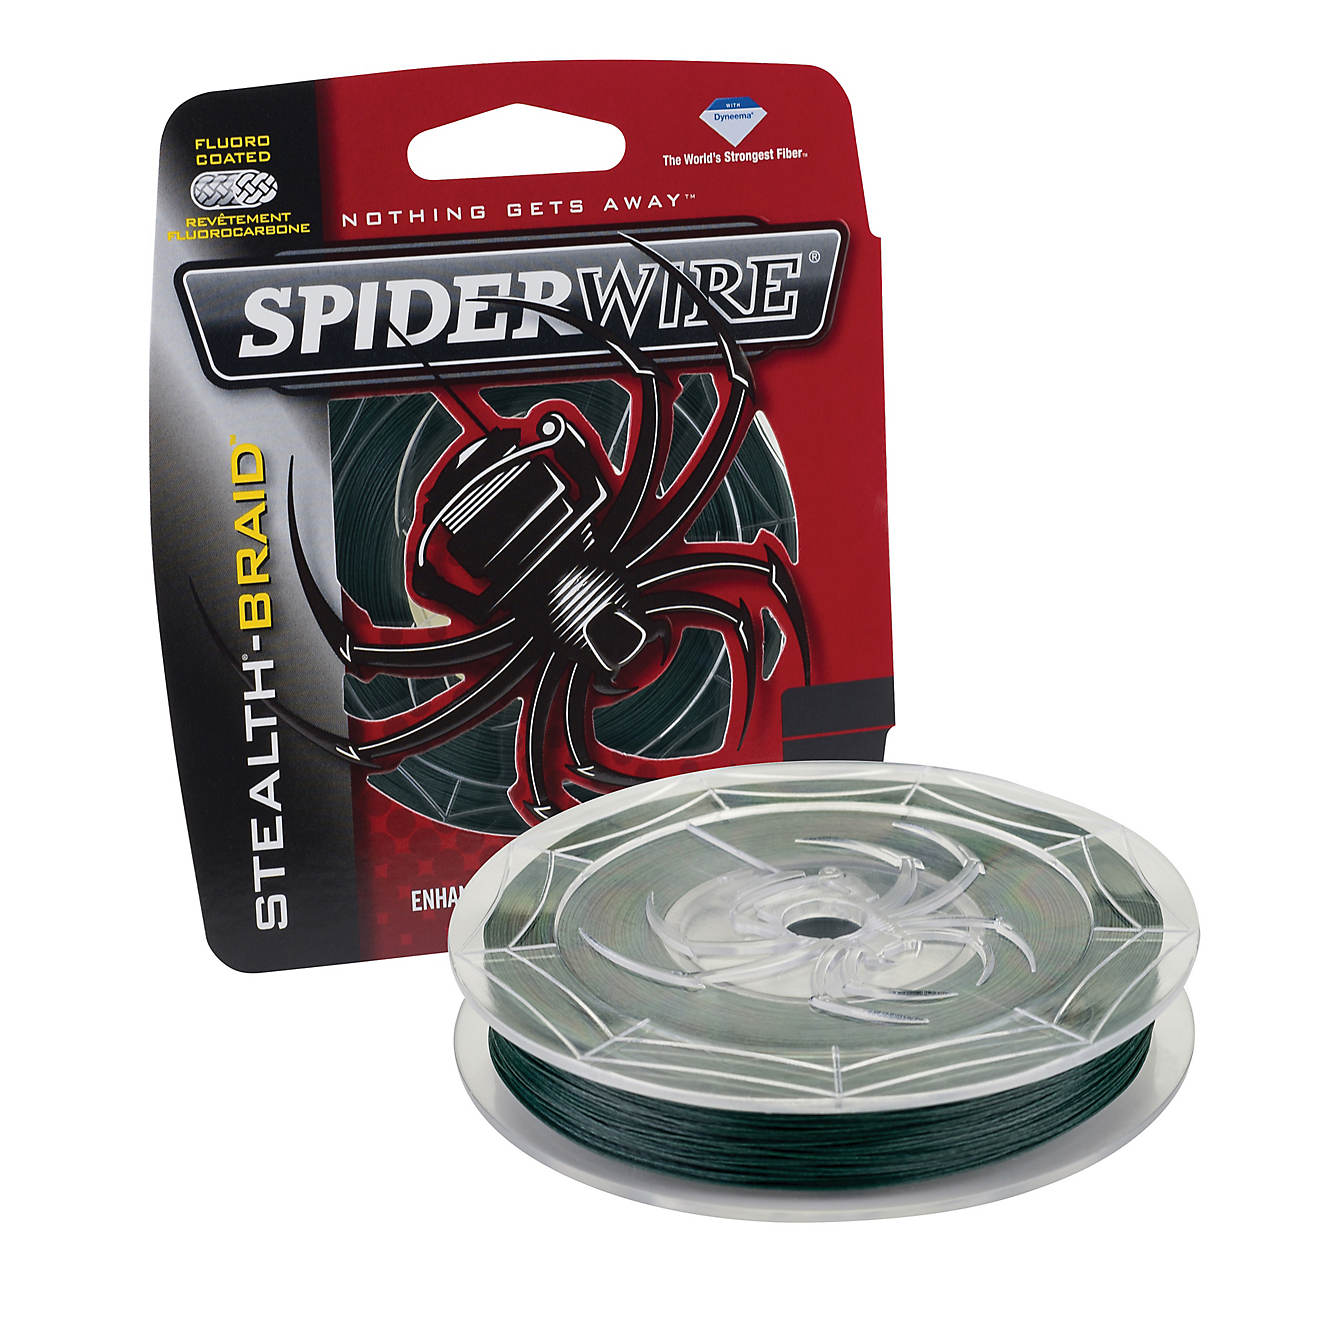 Spiderwire Stealth-Braid - 125 yards Braided Fishing Line                                                                        - view number 1